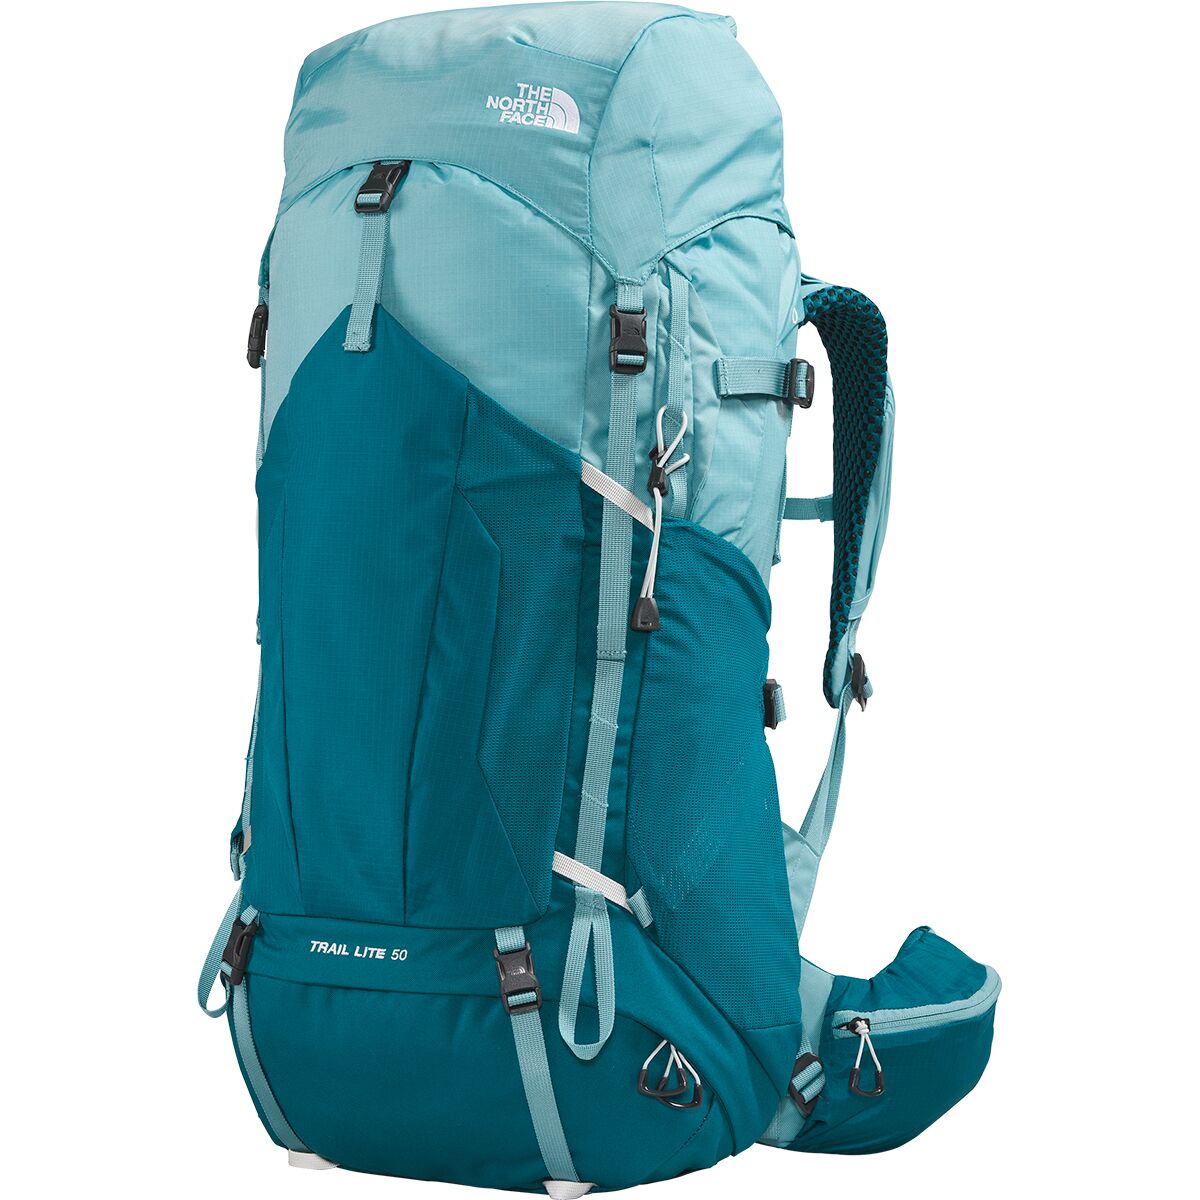 Columbia Outdoor Adventure Backpack Review | The Backpack Guide